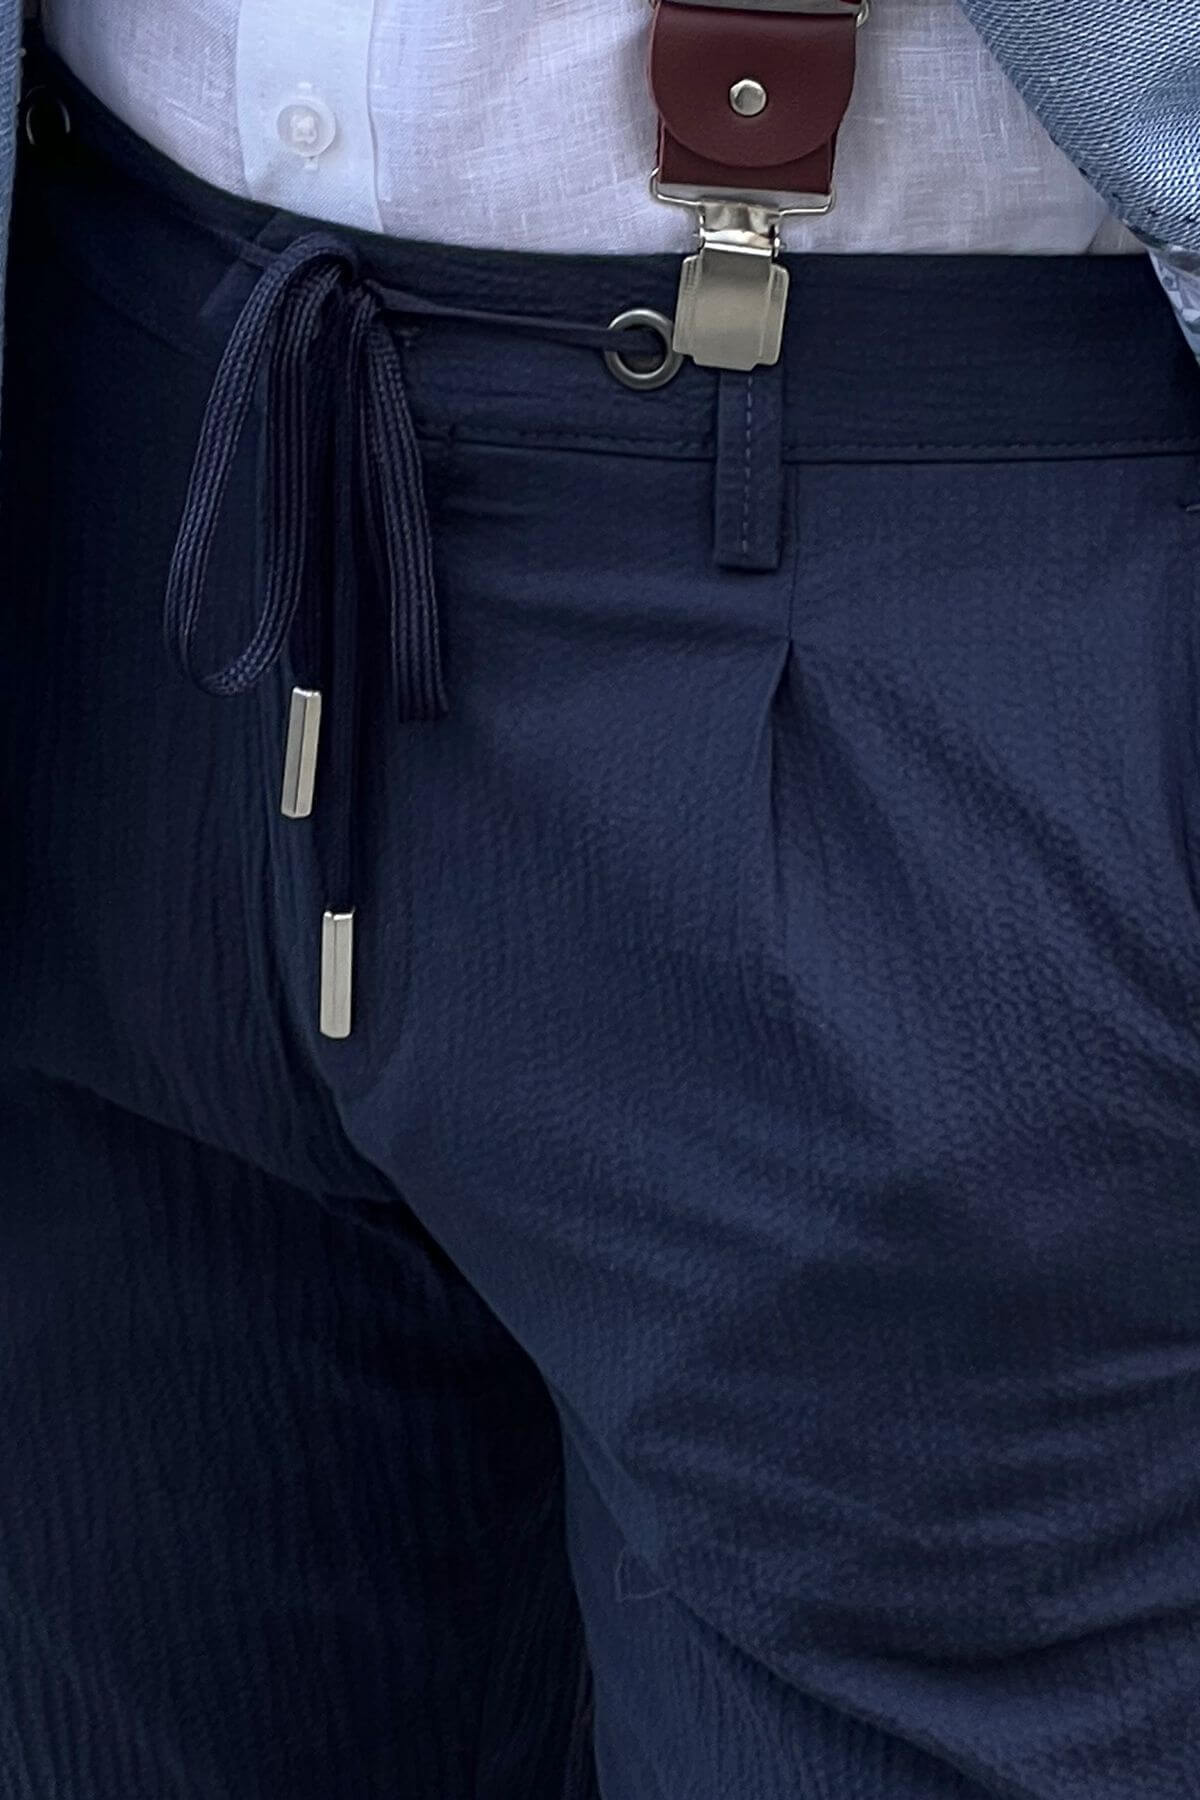 A Slim Fit Navy Blue Trouser on display